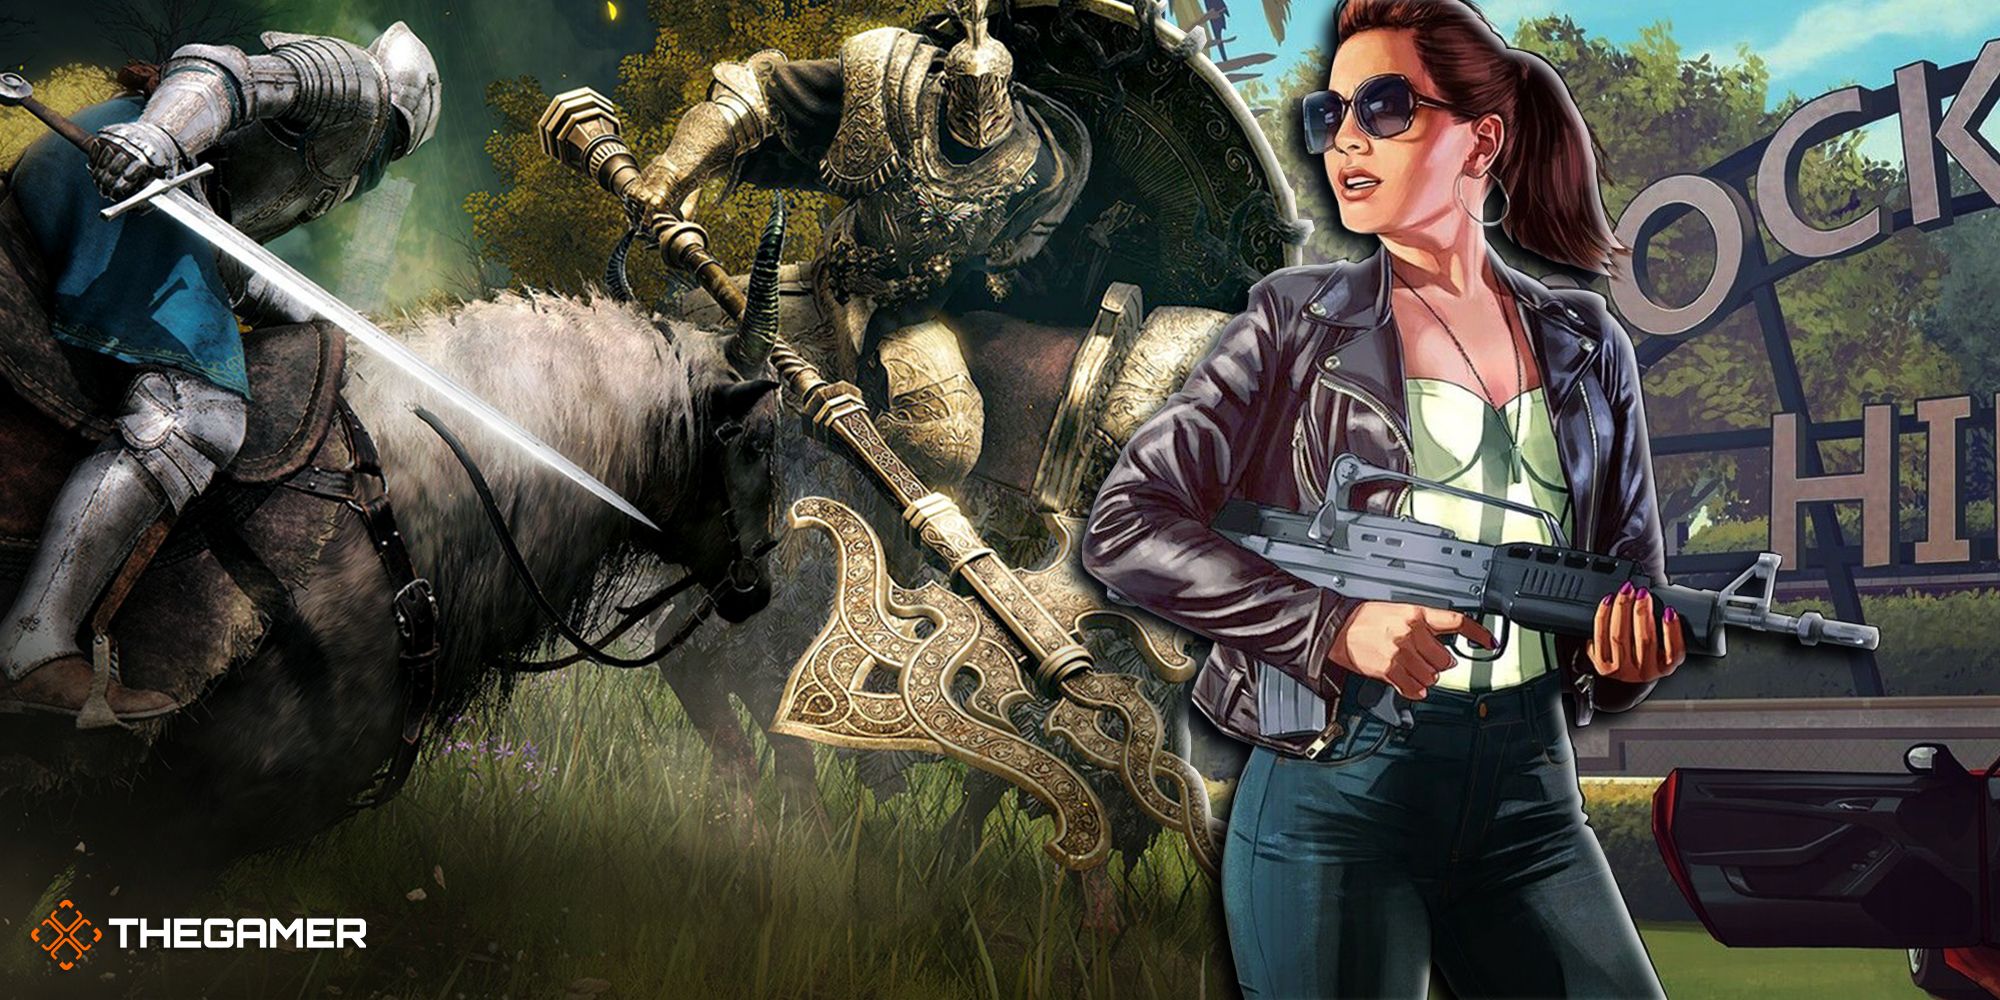 Elden Ring characters on horses next to GTA woman with a gun